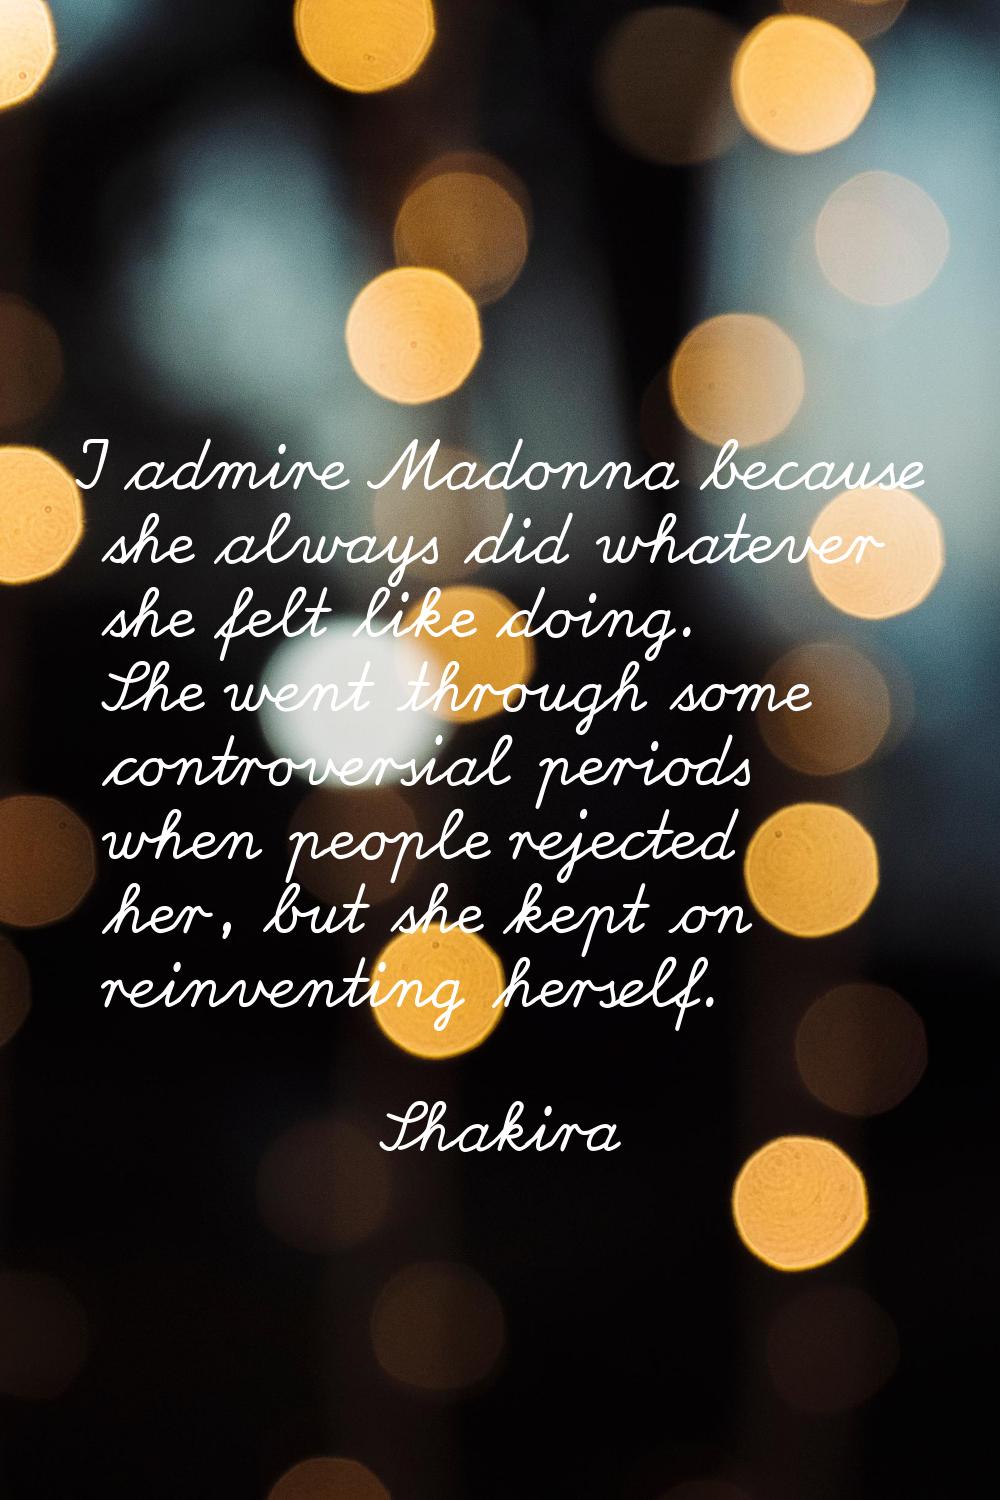 I admire Madonna because she always did whatever she felt like doing. She went through some controv